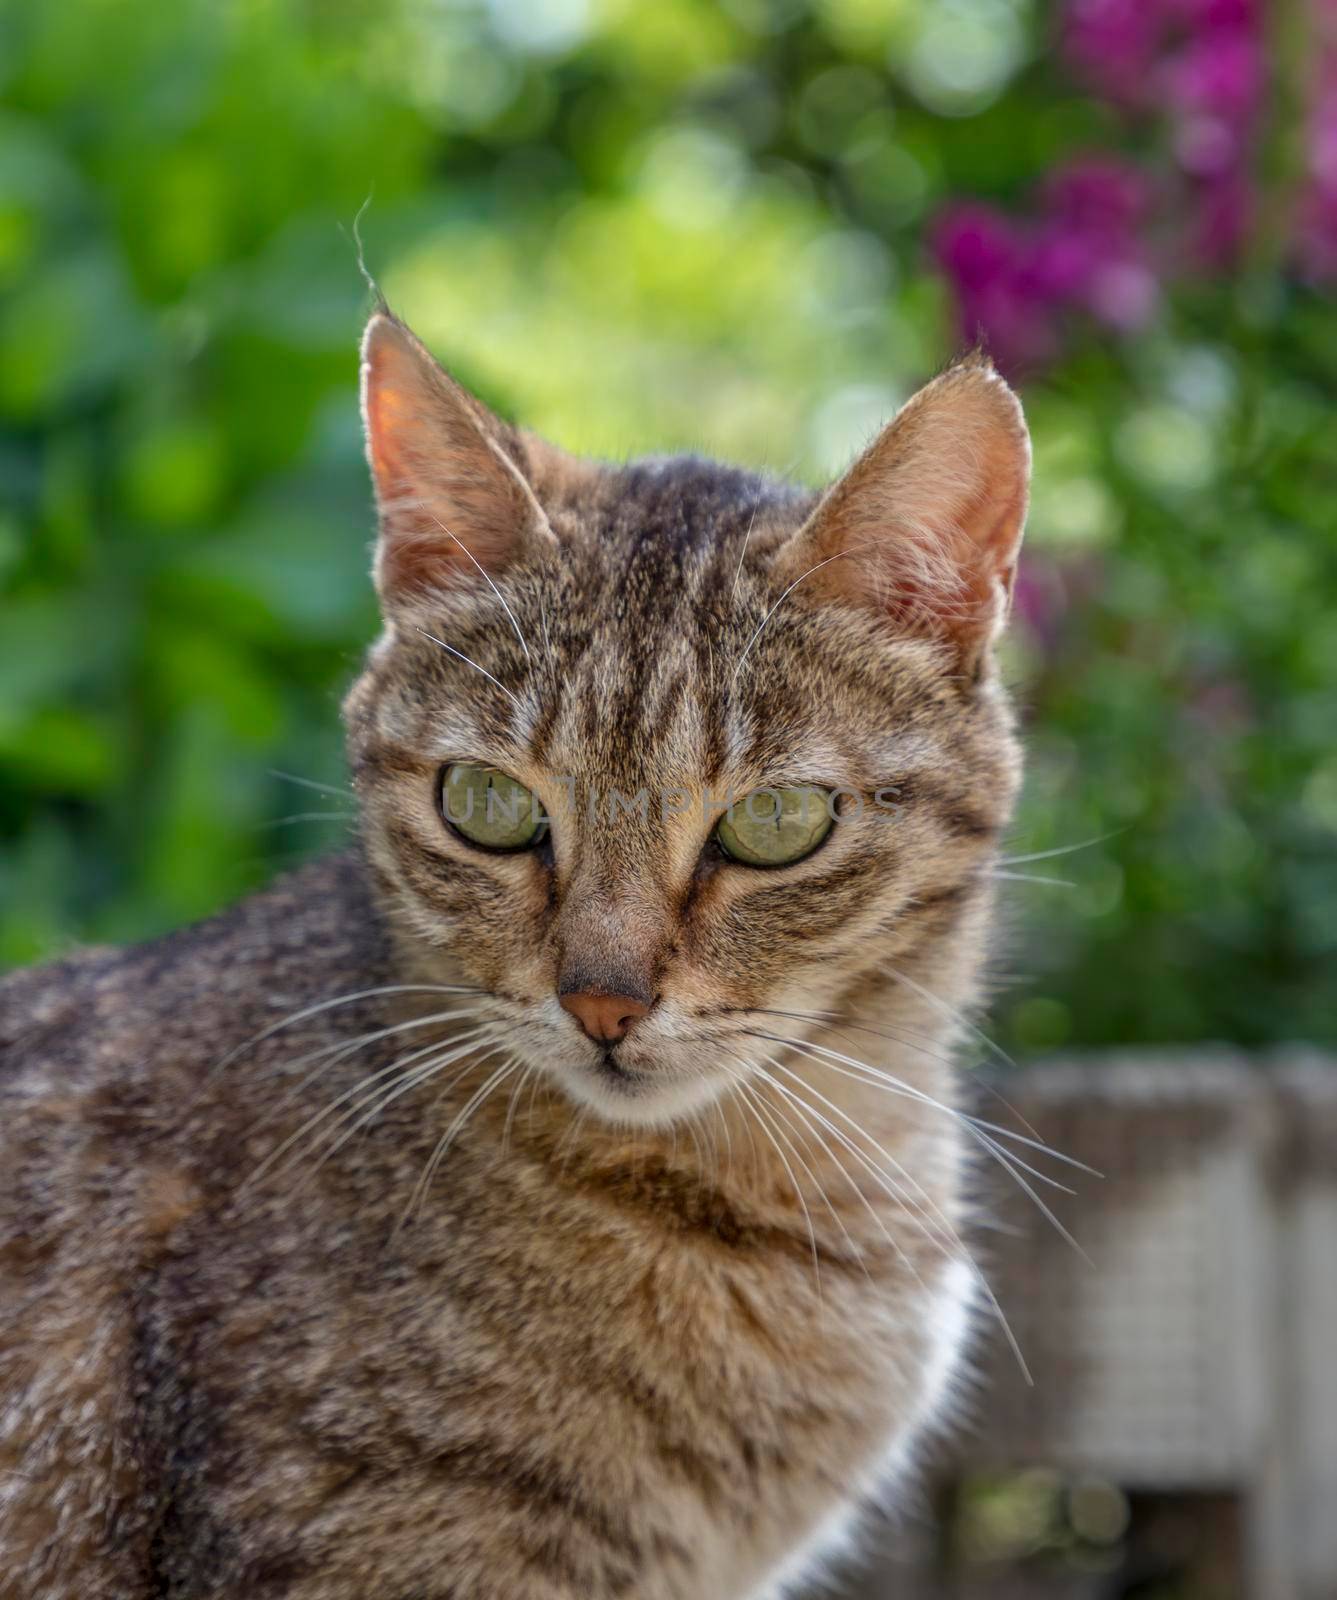 Portrait of beauty wild cat with green eyes in the garden